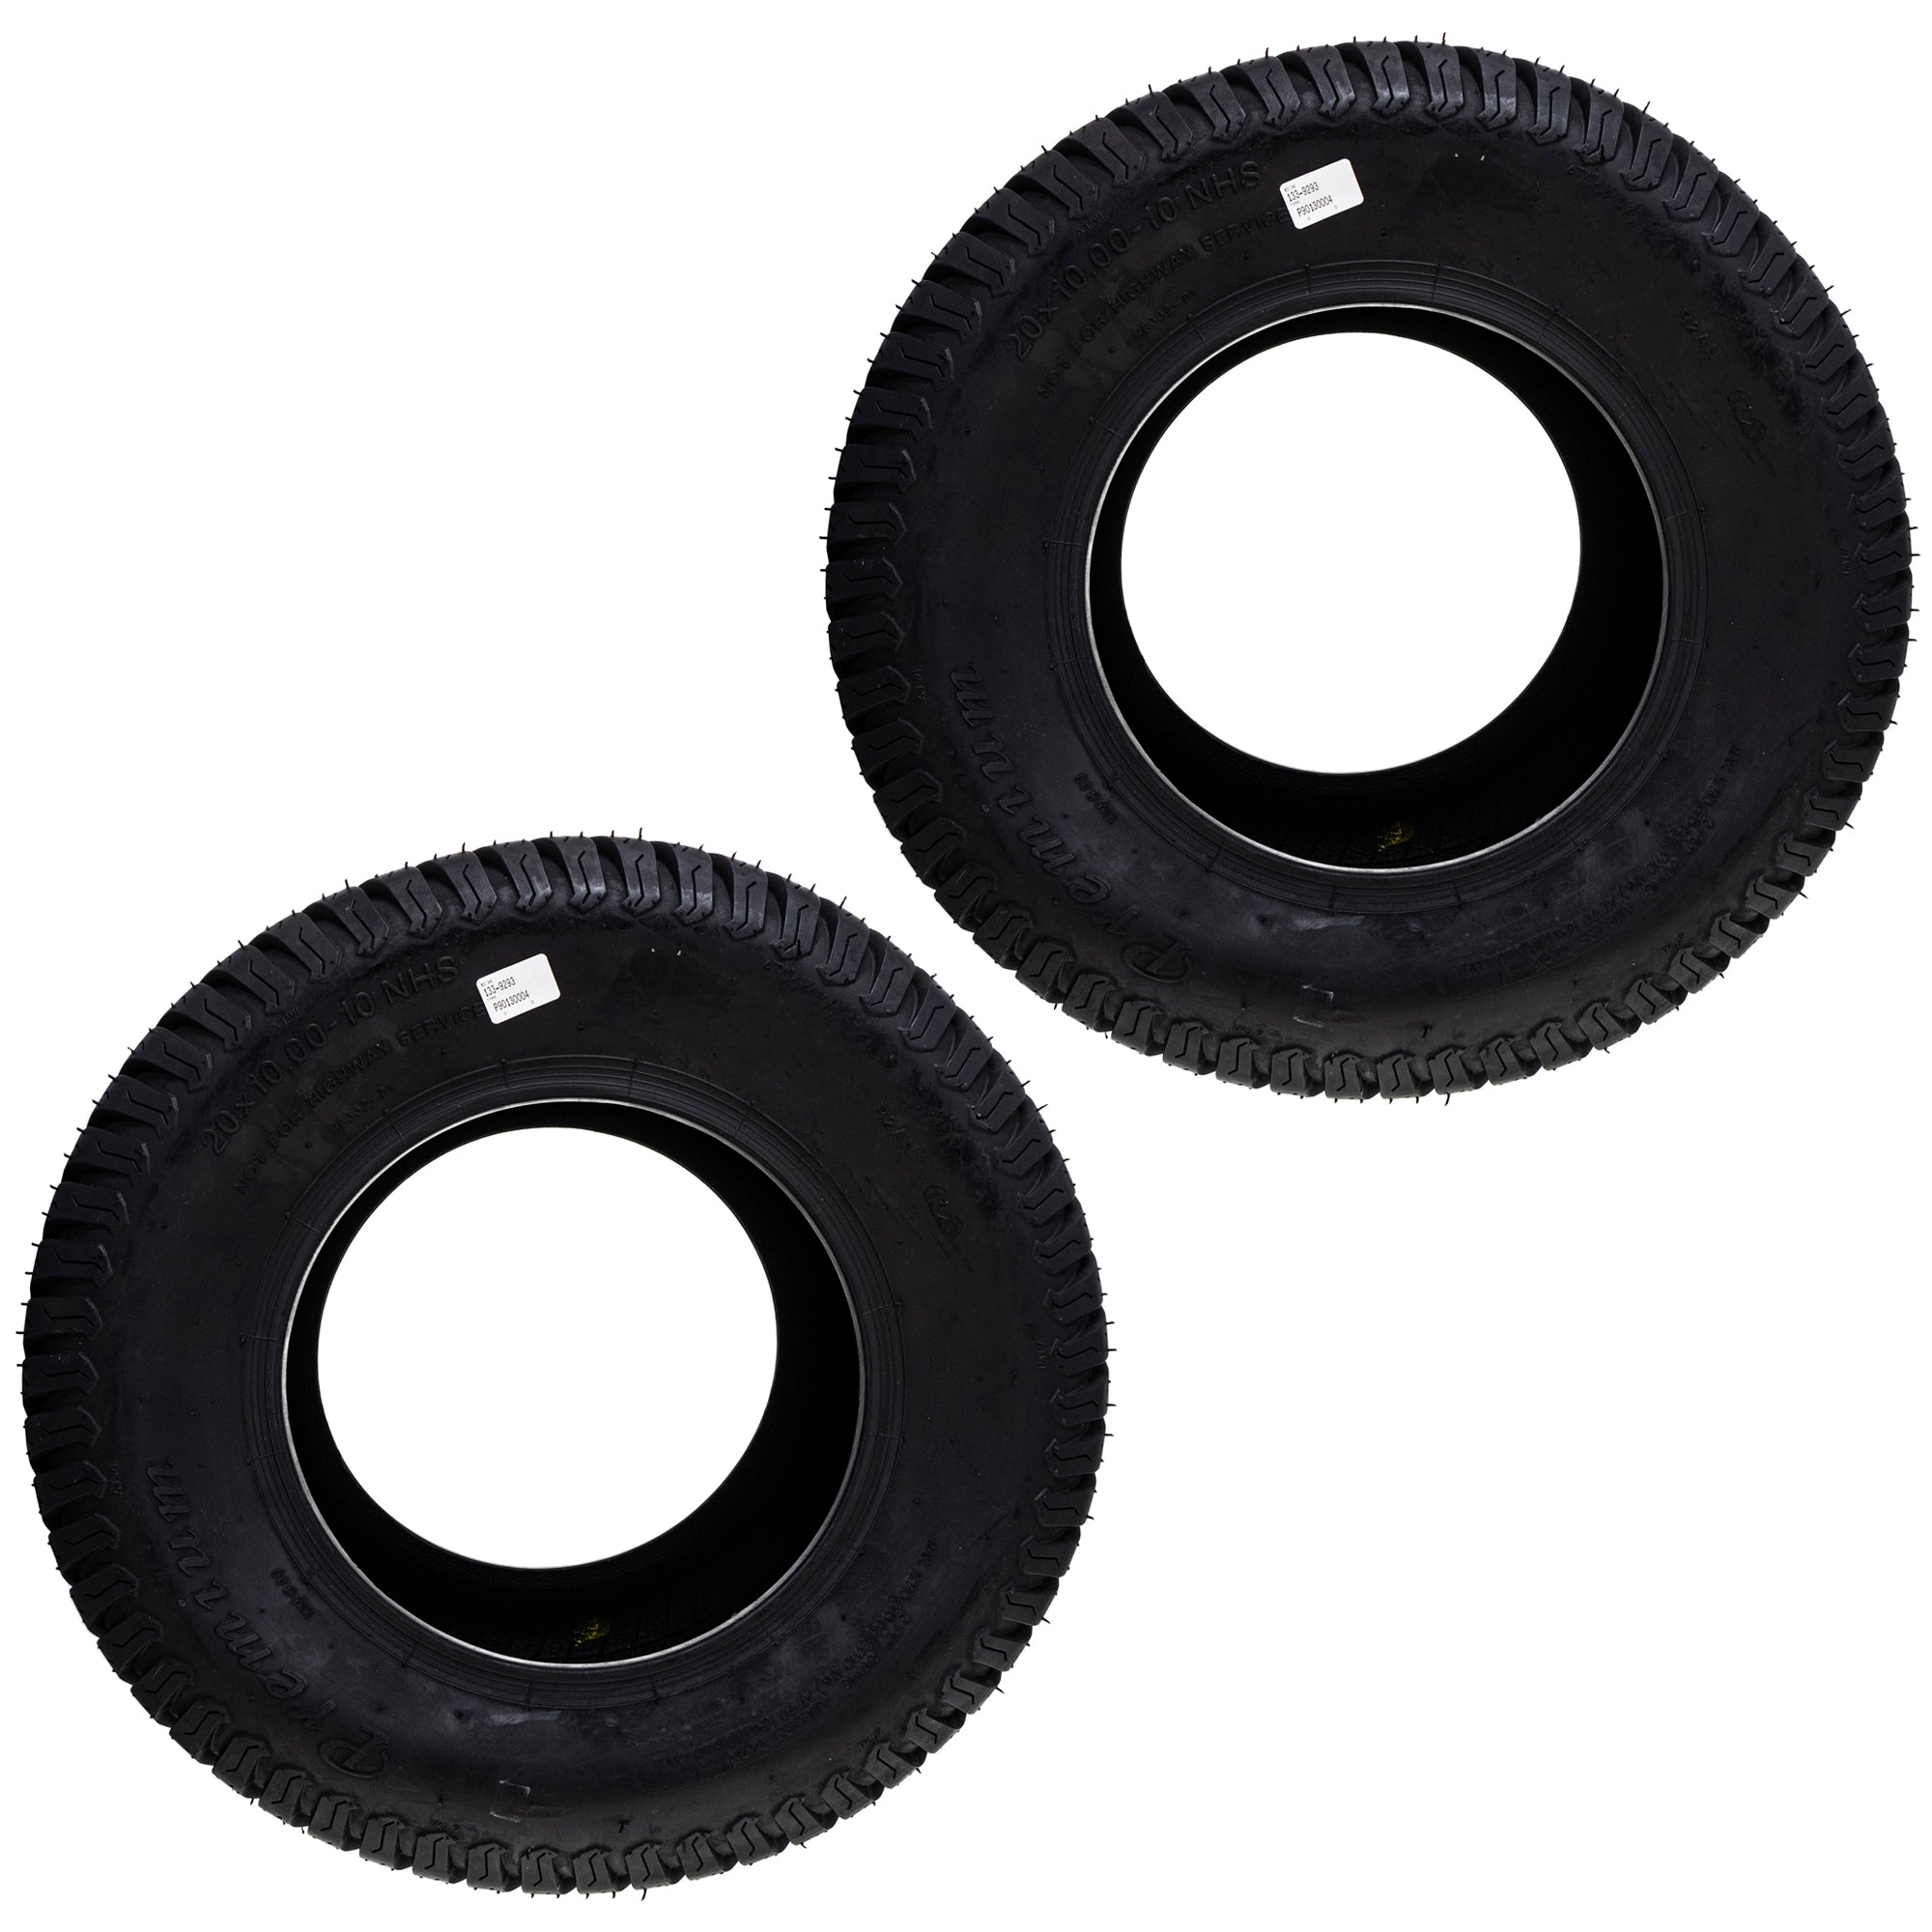 133-9293 Tire Quest S Series Zero Turn 50 60 Inch Models 2 Pack